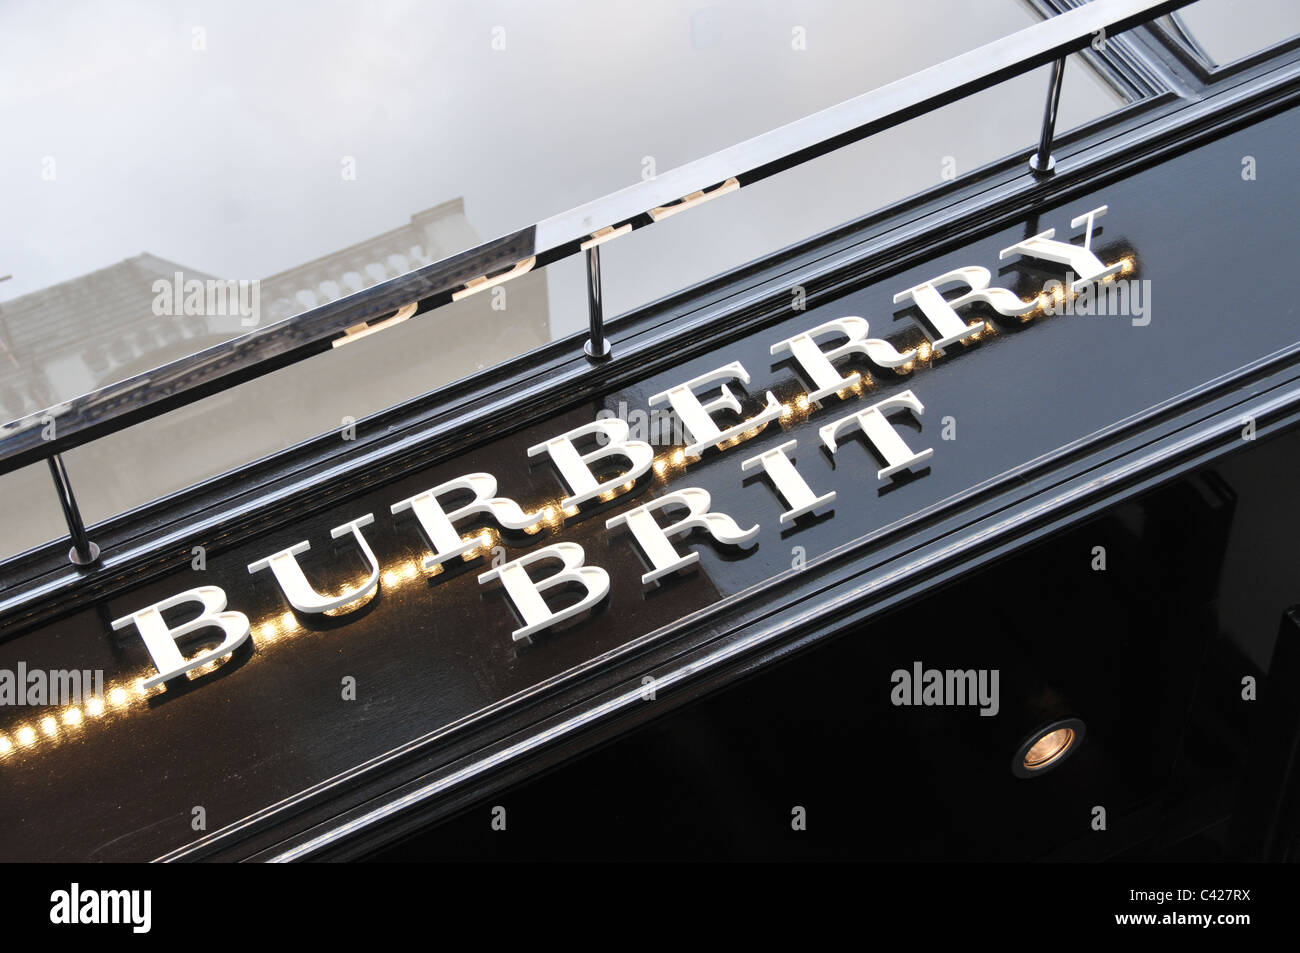 Burberry Brit Covent Garden London style British clothing Stock Photo - Alamy